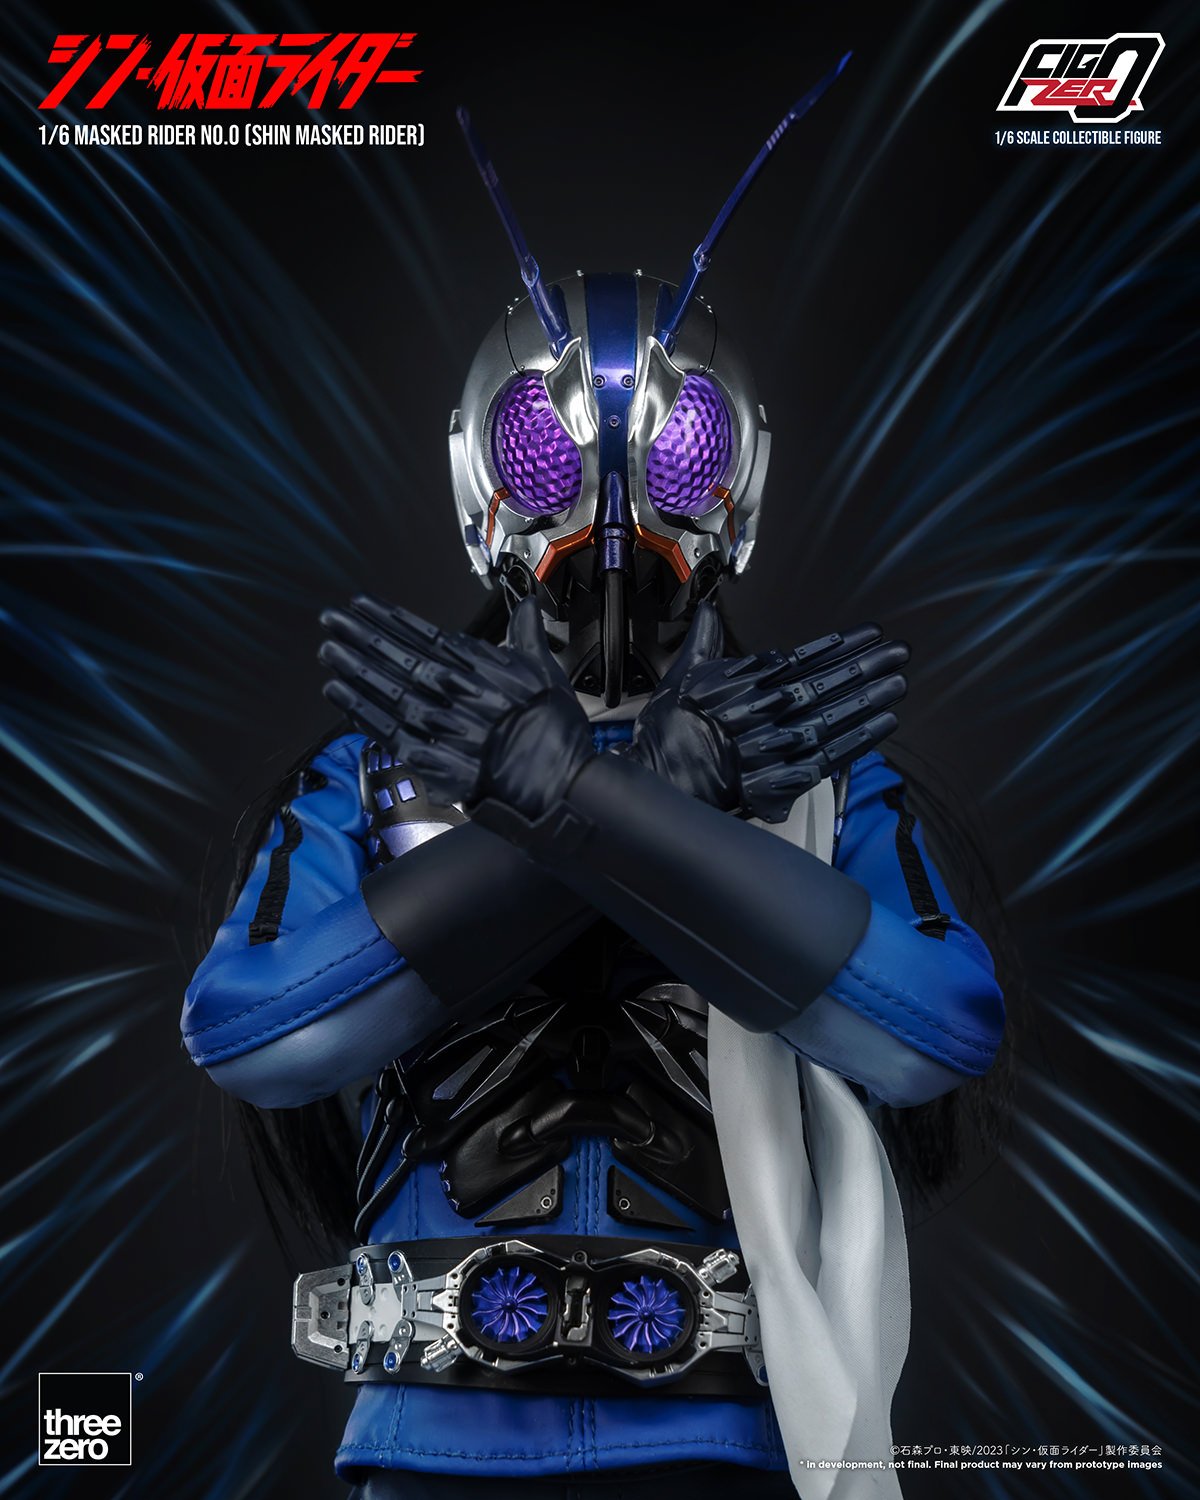 Masked Rider No.0 Sixth Scale Figure by Threezero | Sideshow Collectibles